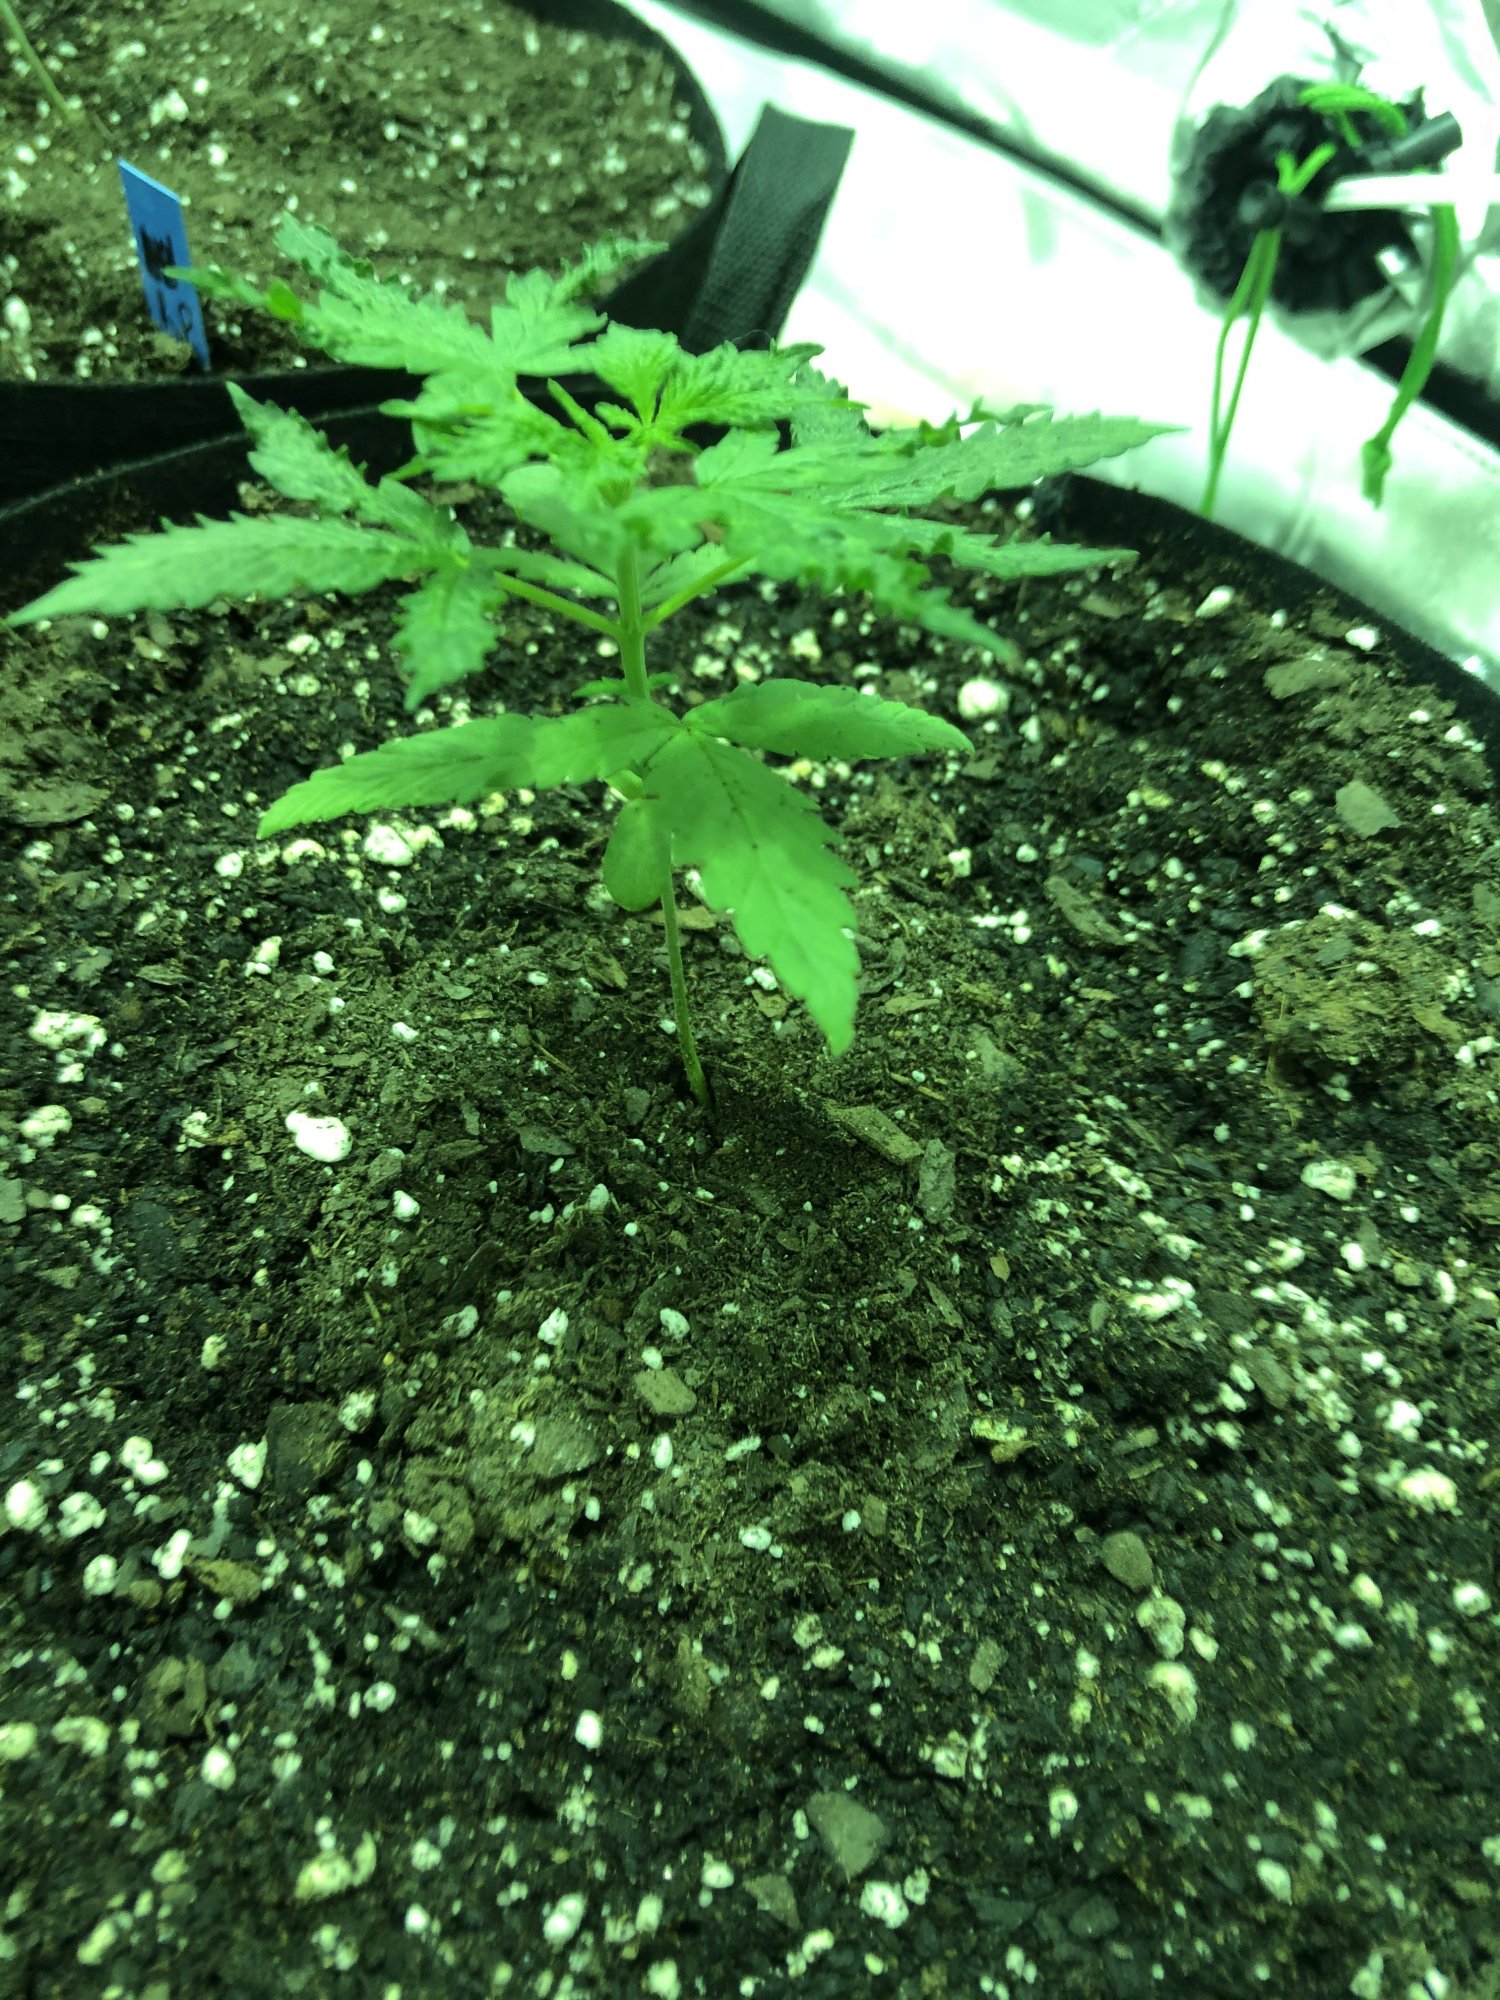 Could this be a deficiency 2